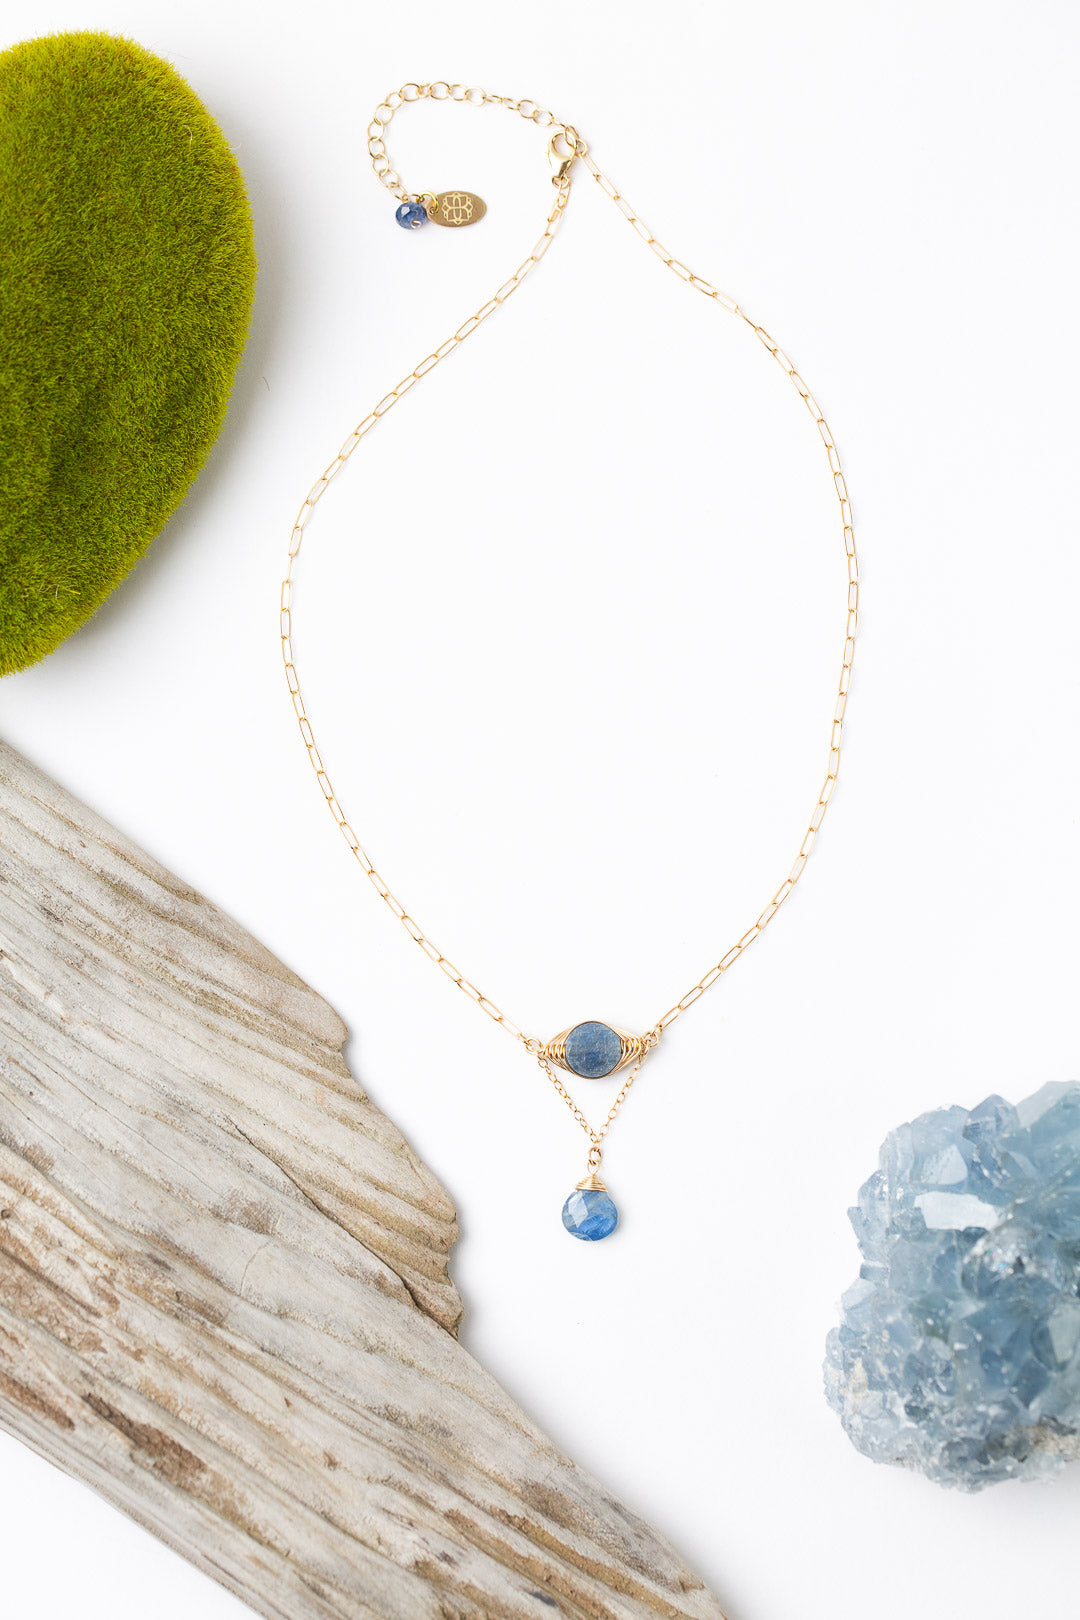 Ripple 15-17" with Kyanite, Gold Simple Necklace